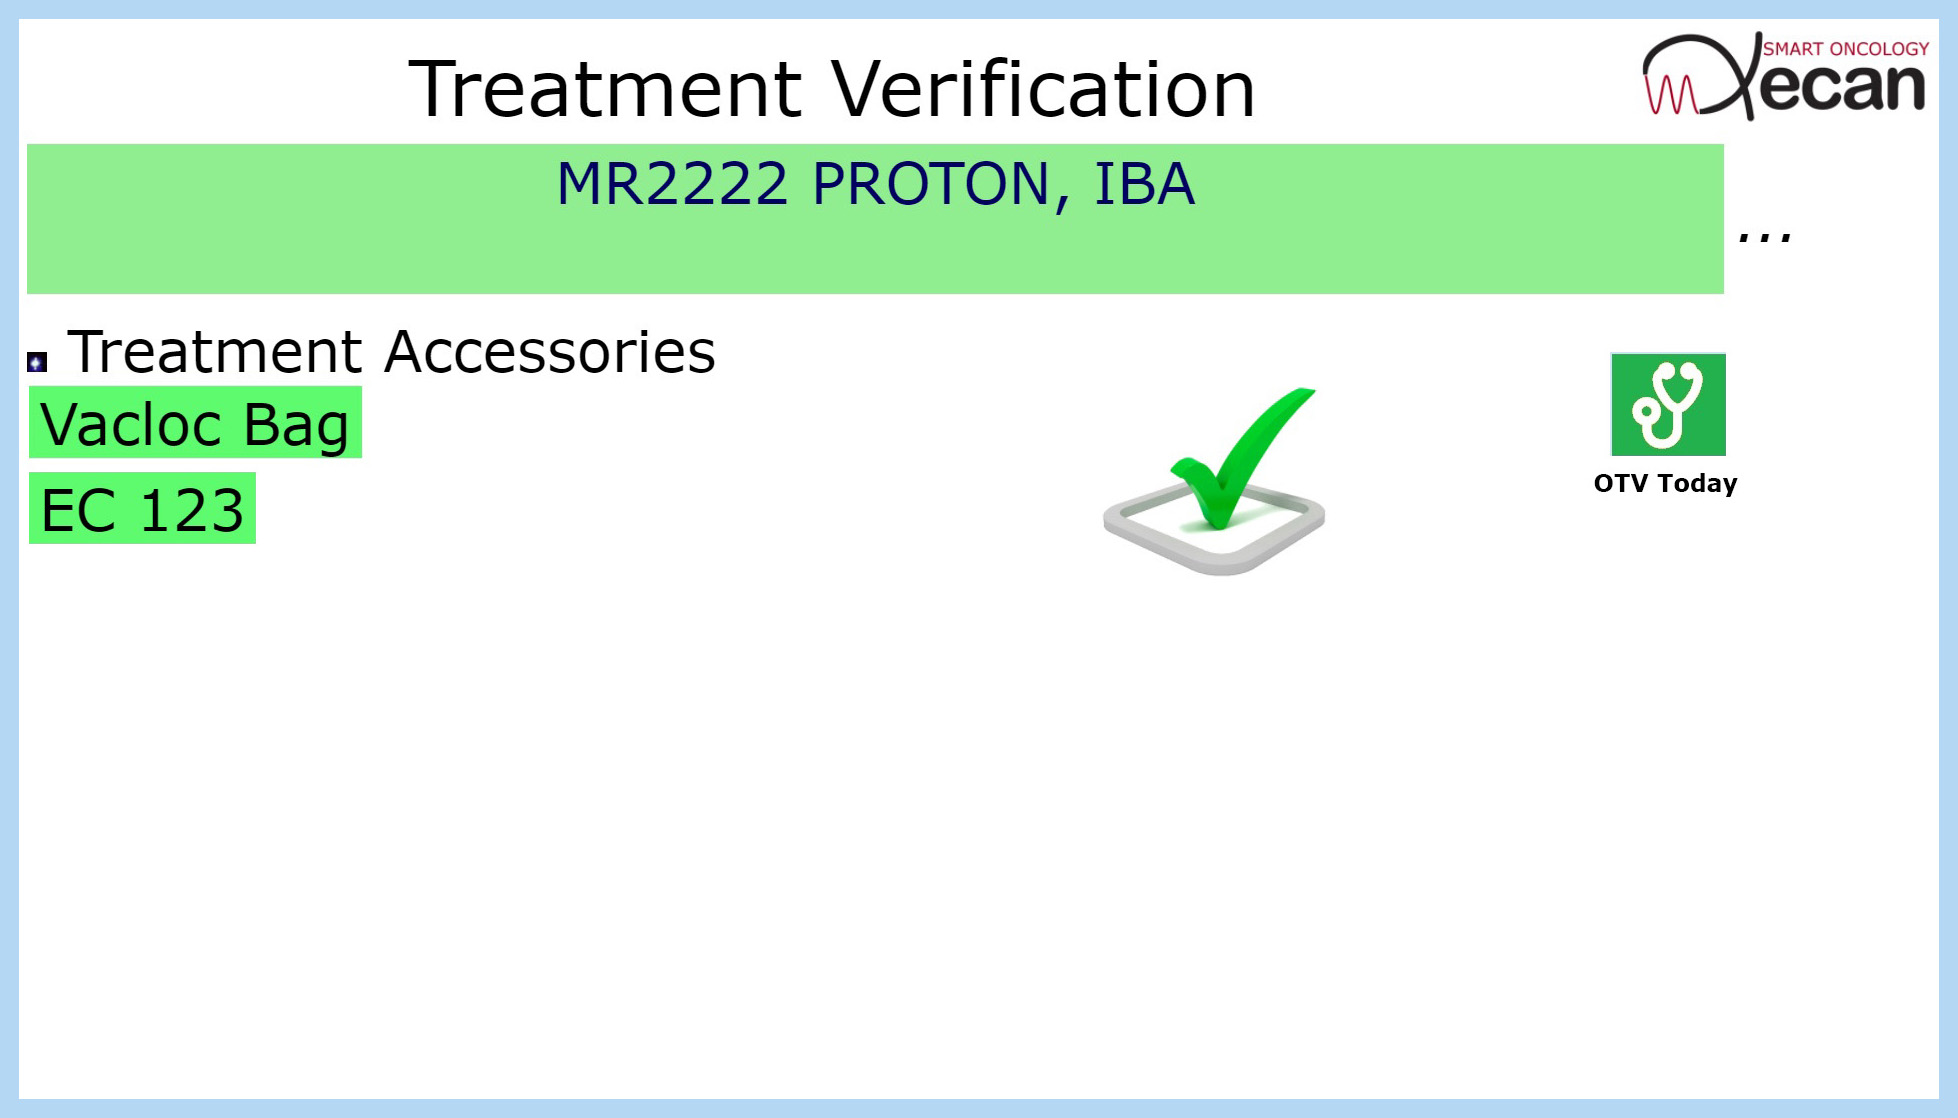 Patient and accessory verified